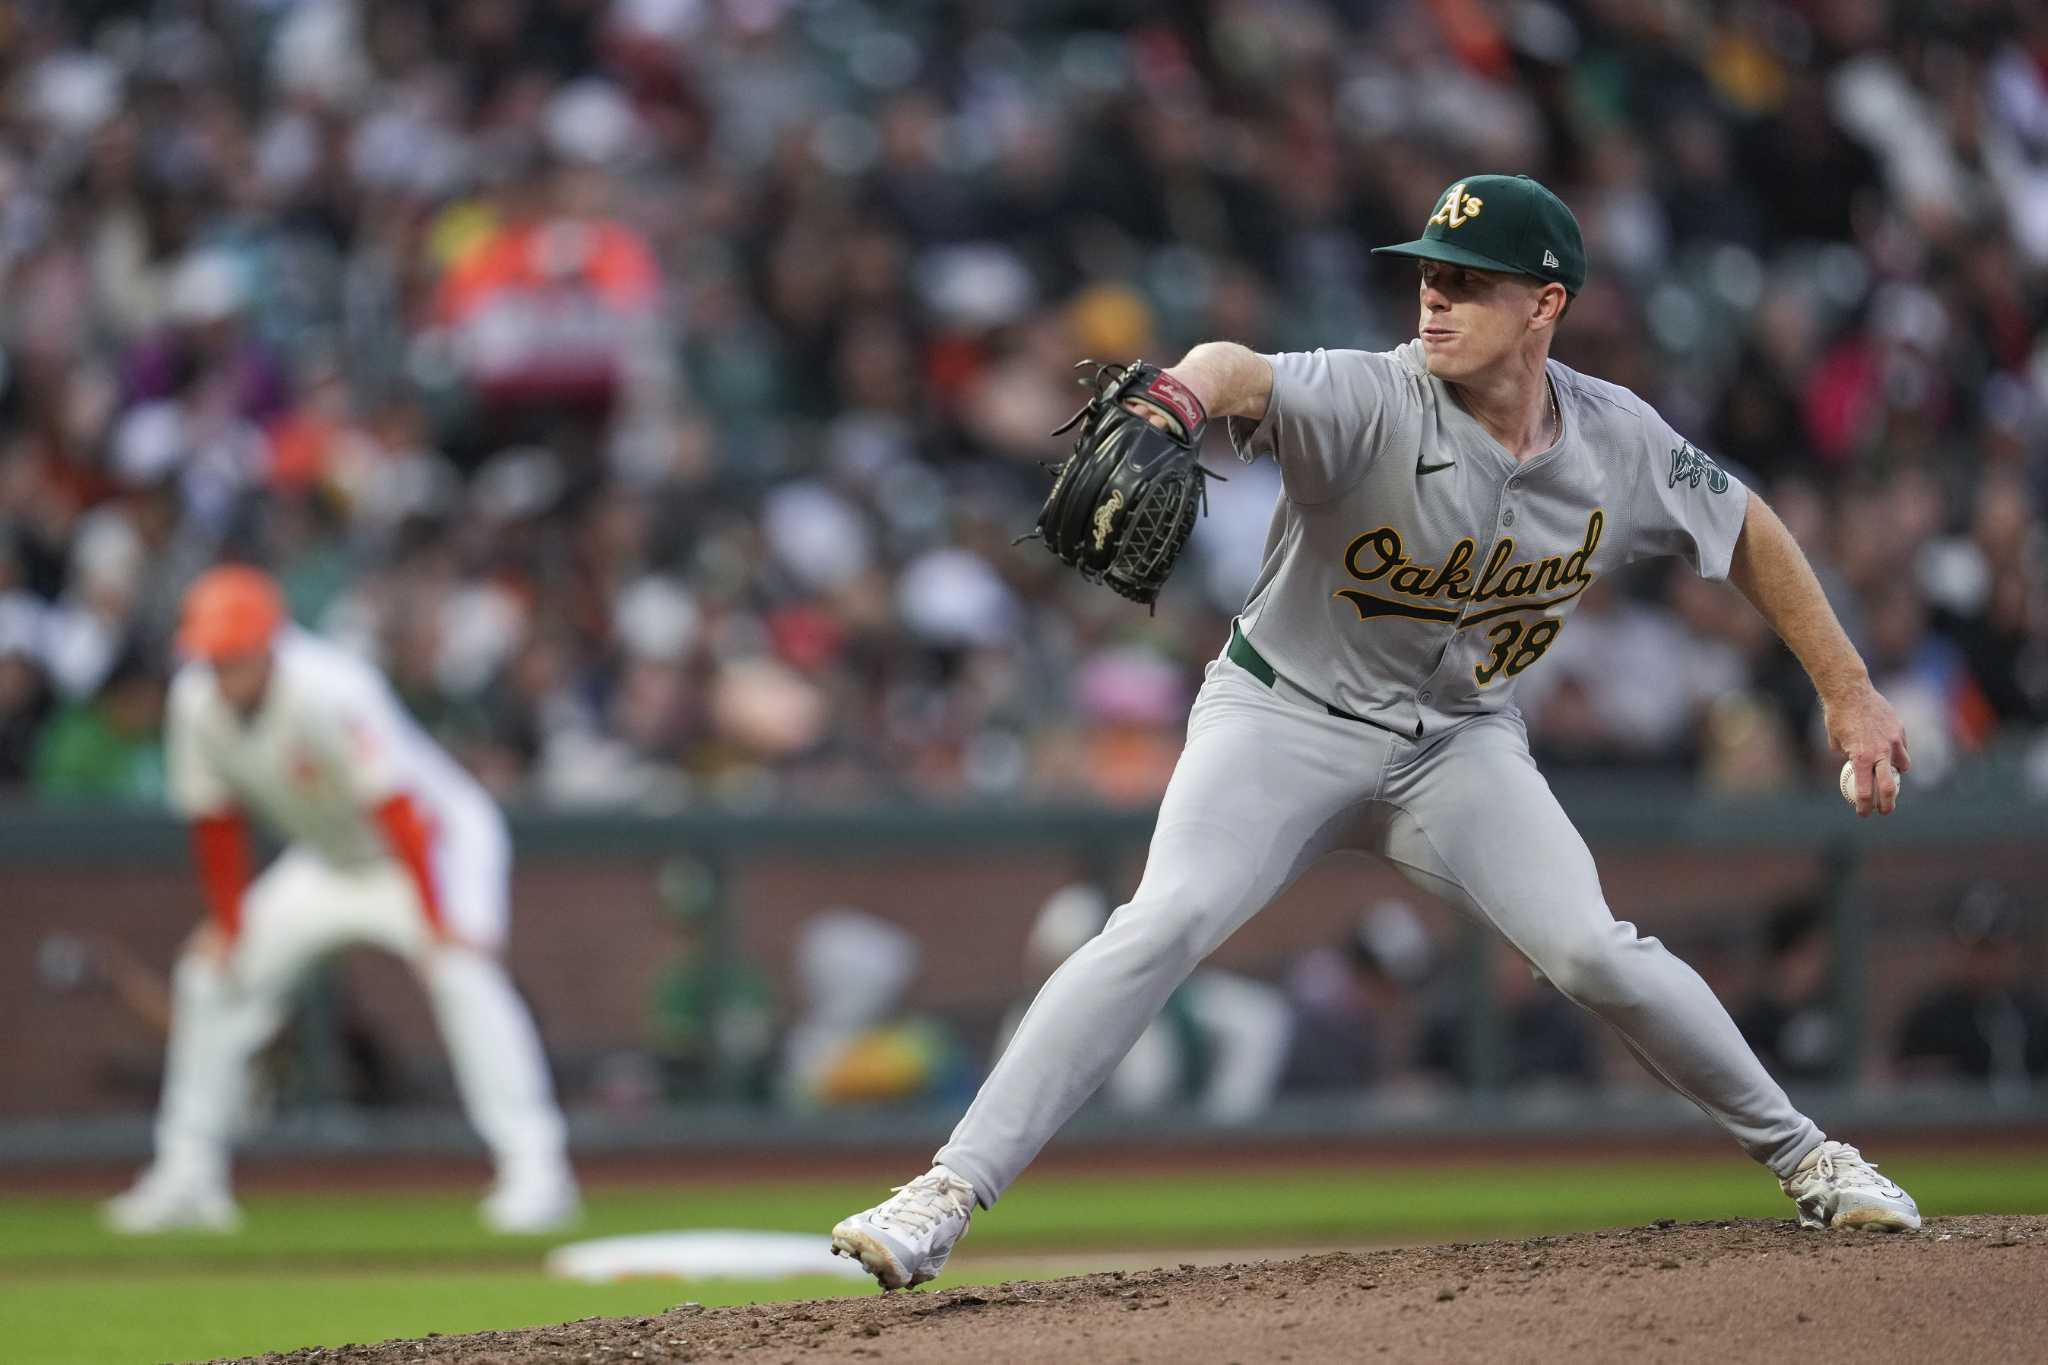 Sears pitches 7 shutout innings, Athletics hit 4 homers in 5-2 win over Giants